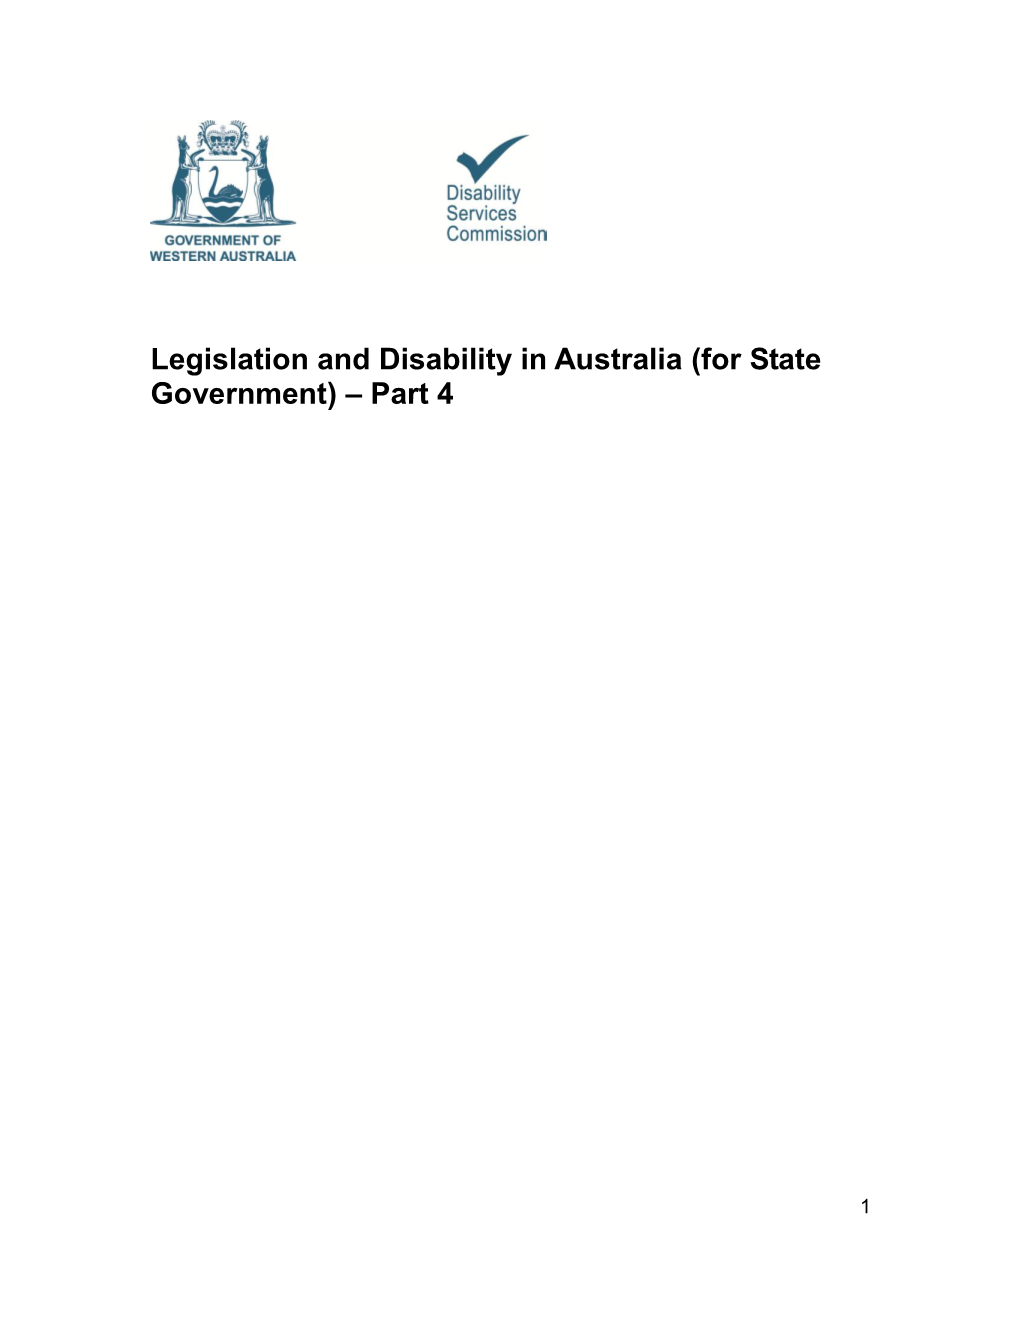 Part 4 Legislation and Disability in Australia for State Government